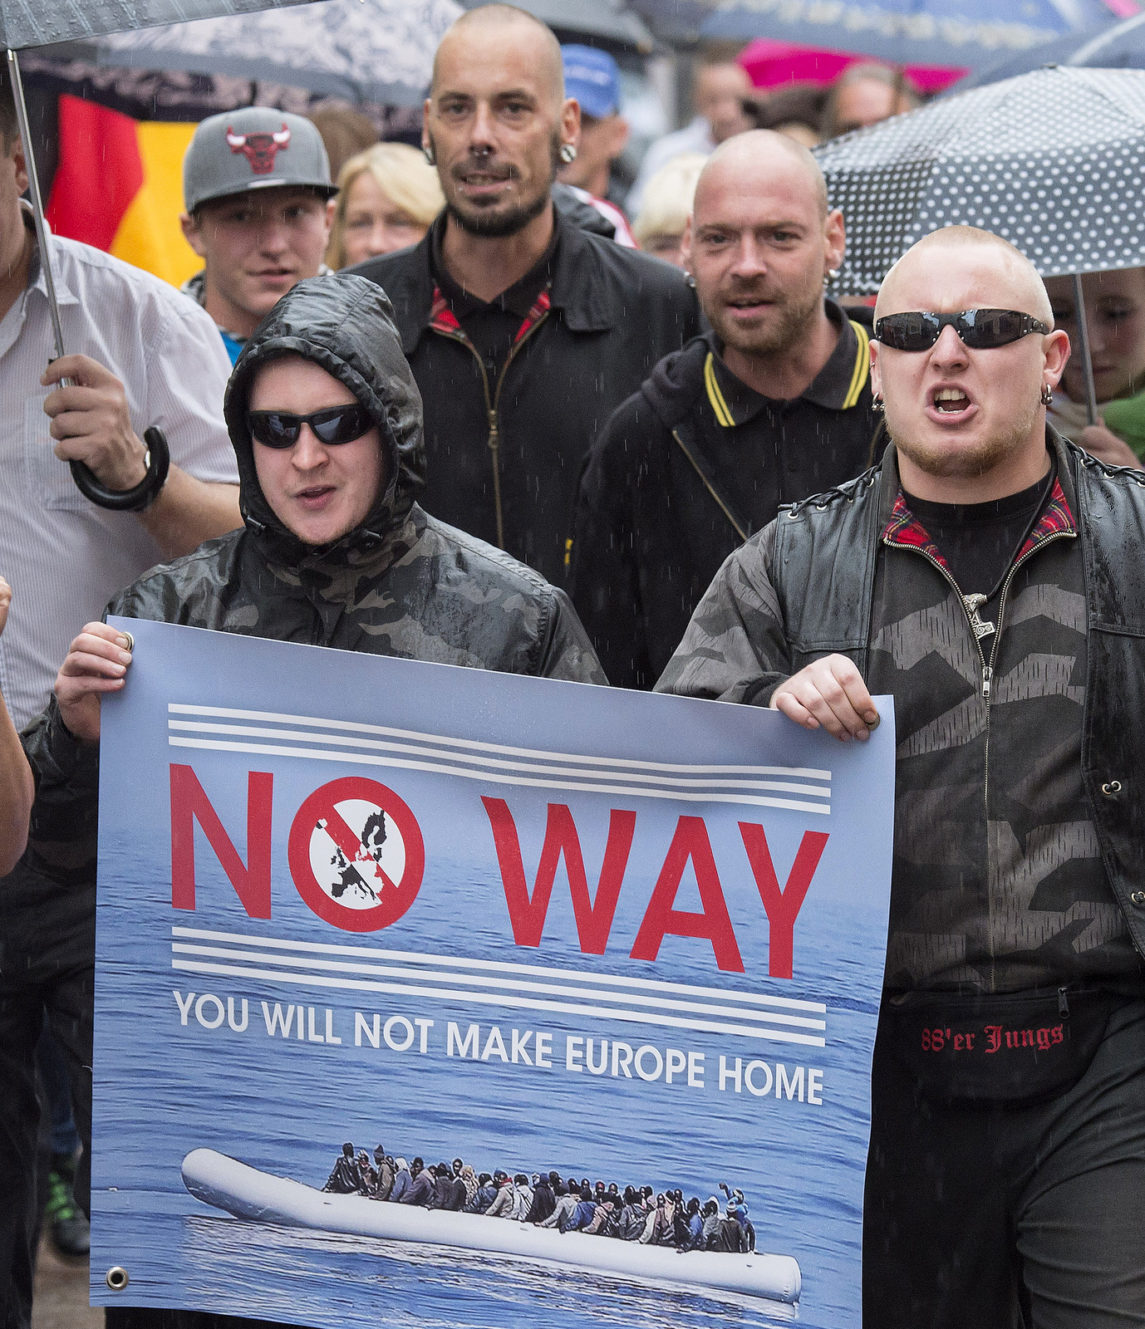 German Court Green Lights Neo-Nazi Party